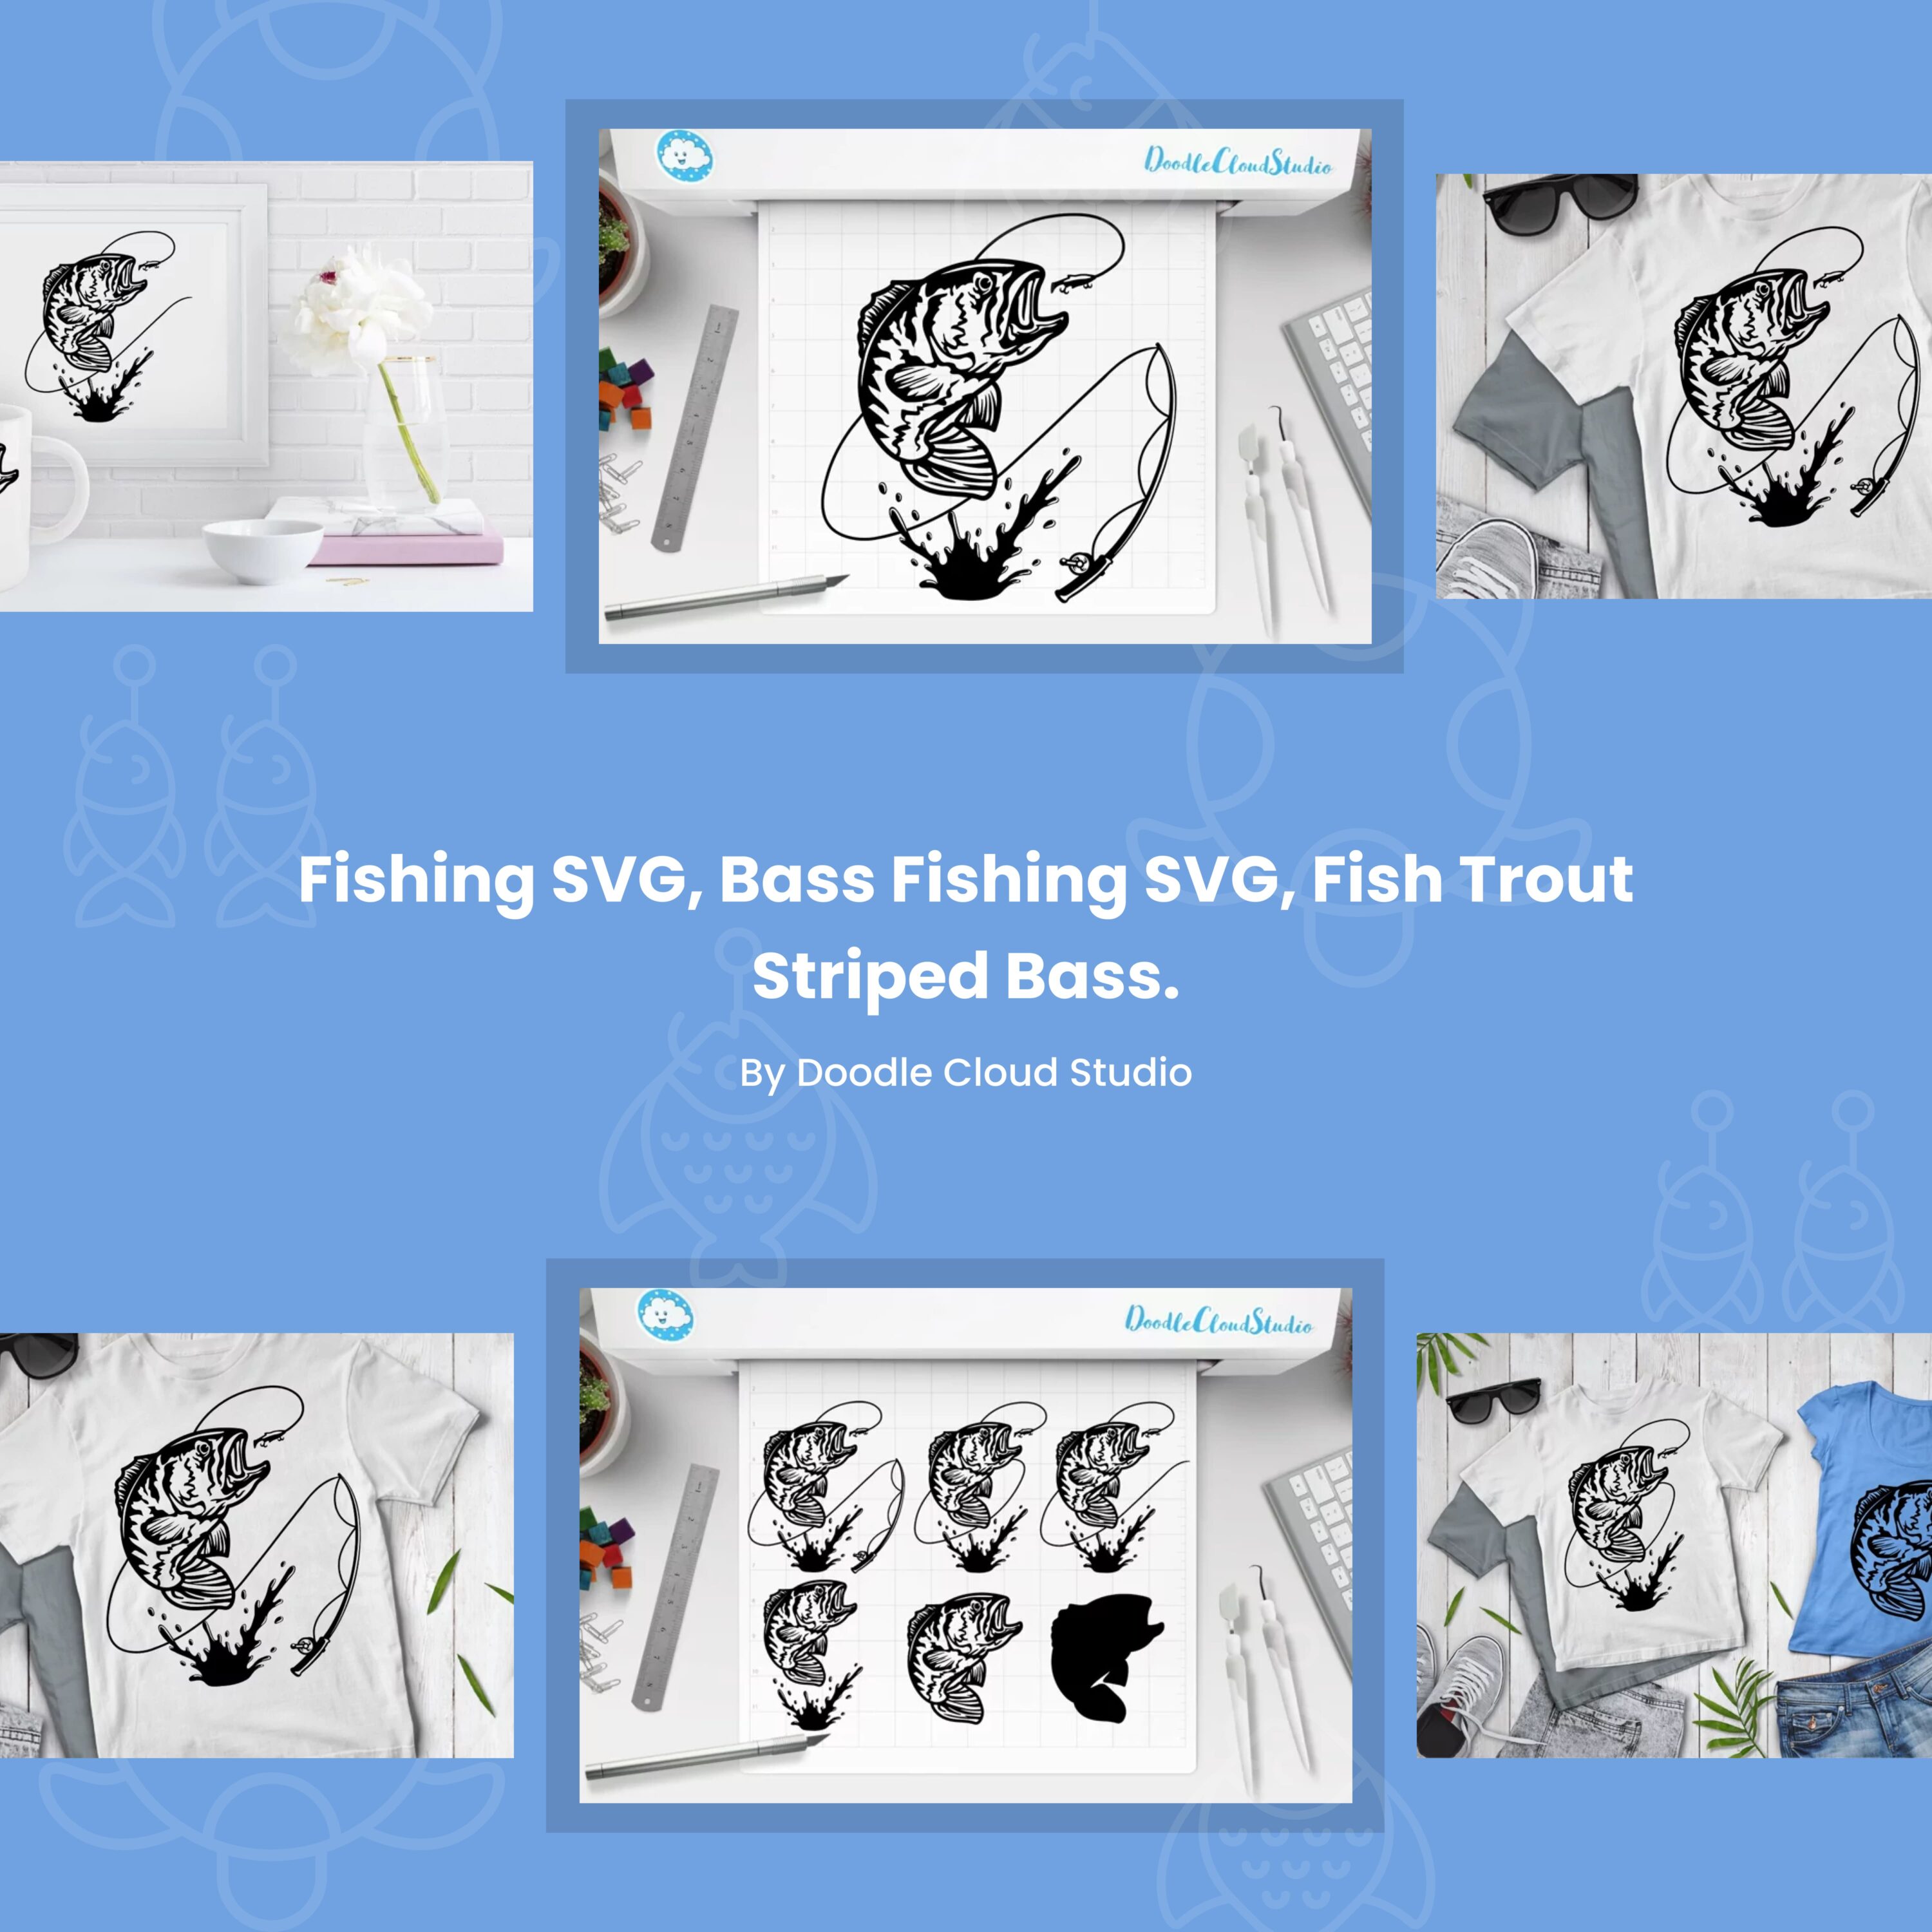 Fishing SVG, Bass Fishing SVG, Fish Trout Striped Bass. cover.